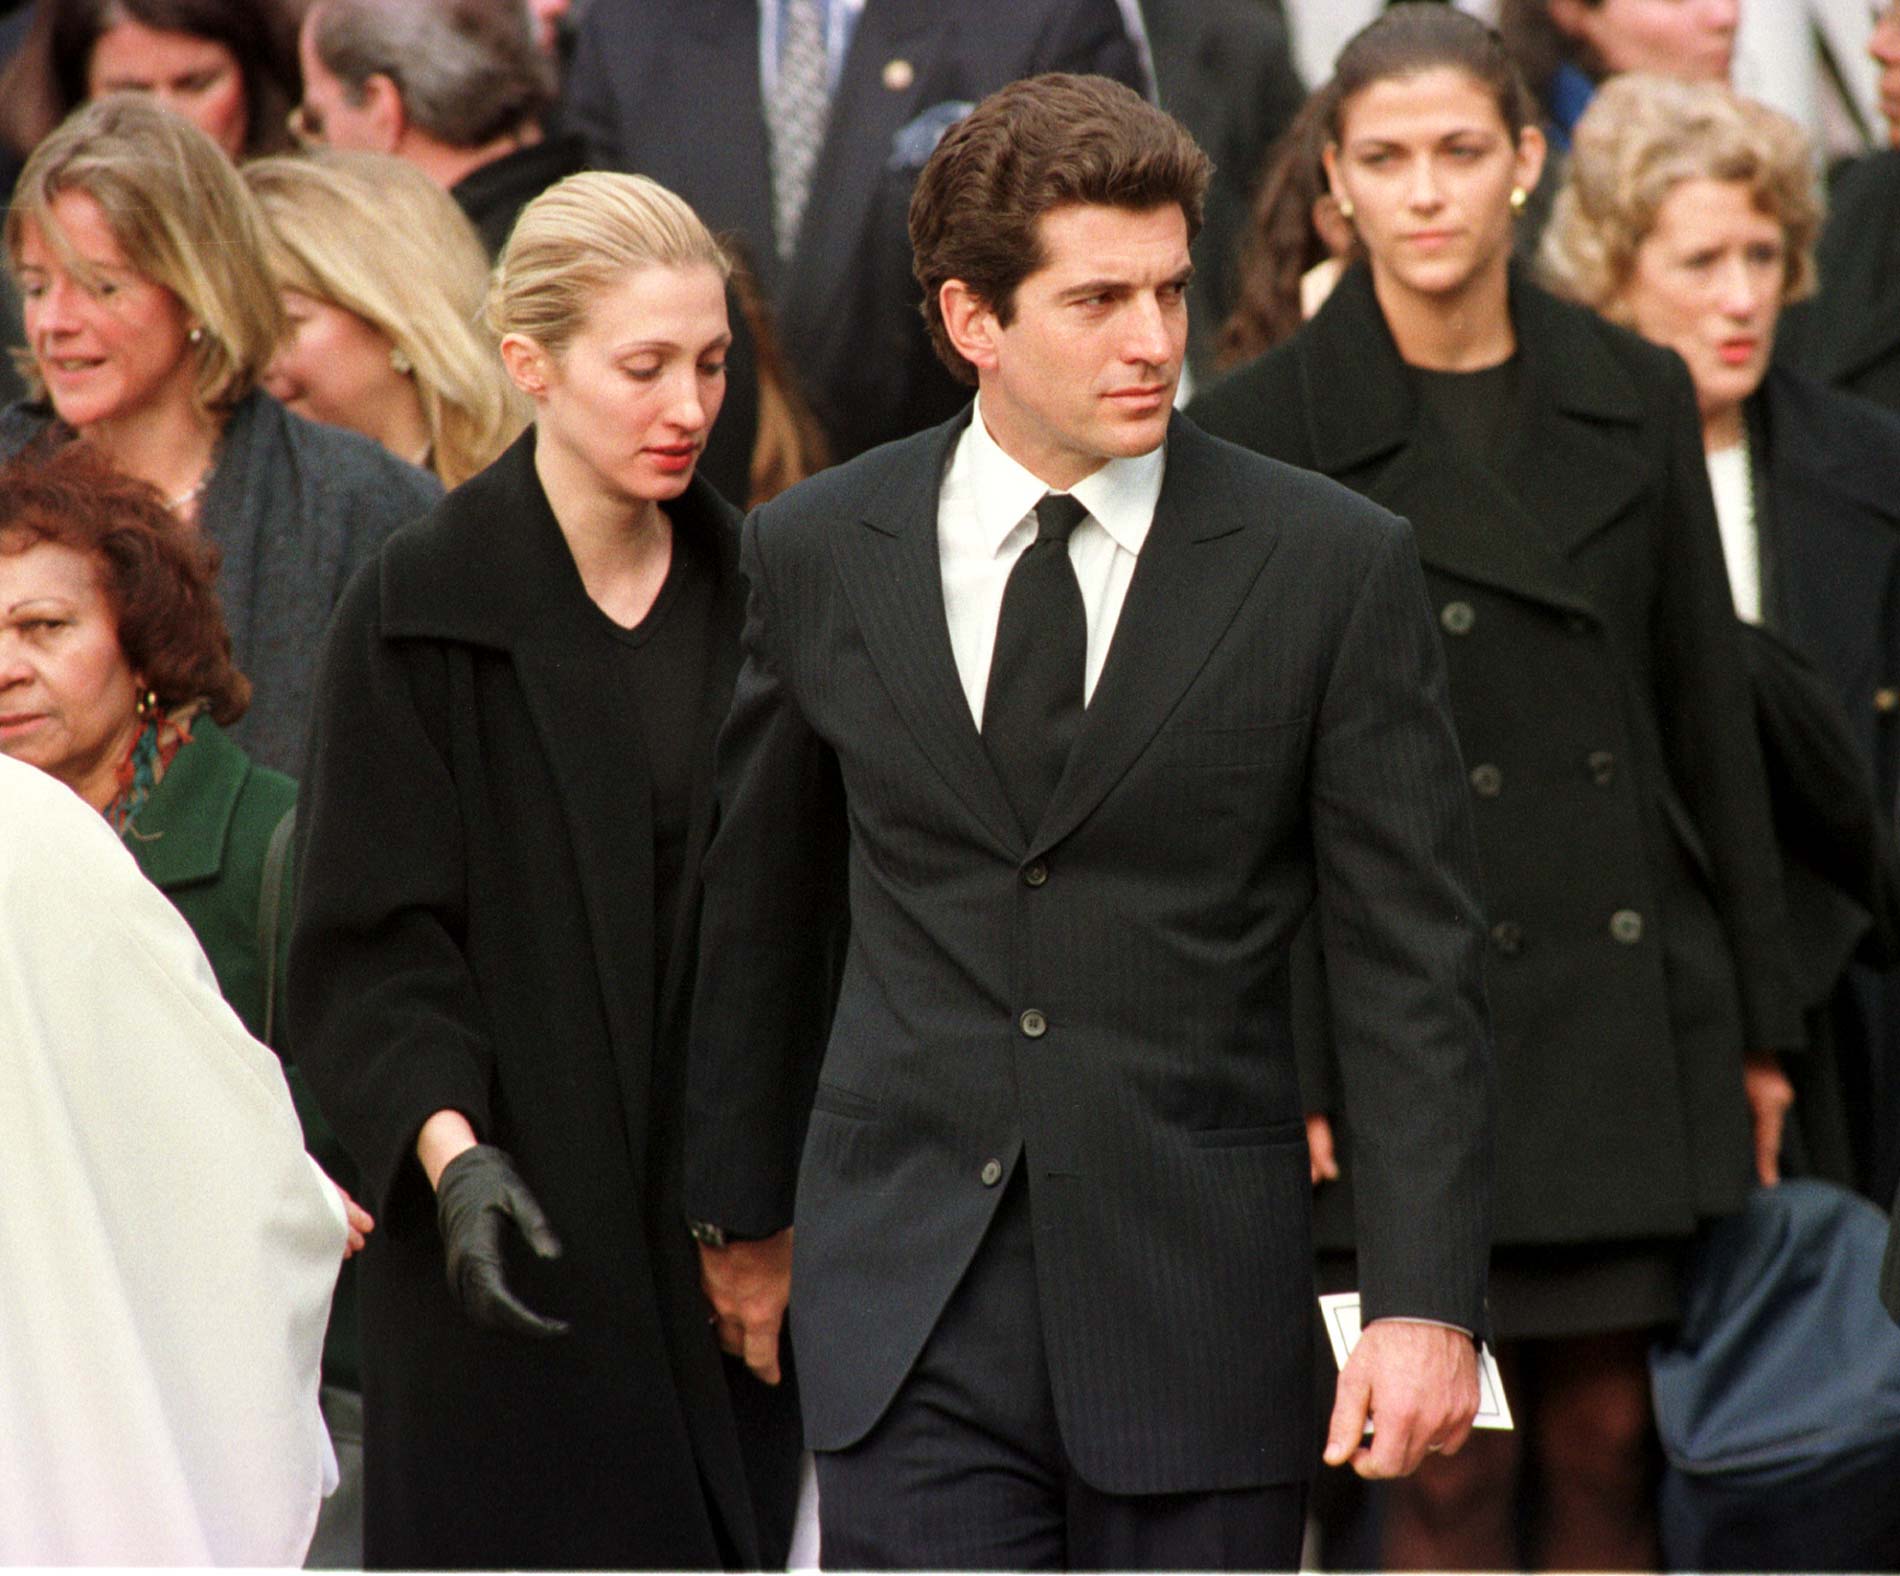 John F. Kennedy Jr. with his wife Carolyn after Michael Kennedy's funeral in Massachusetts on March 1, 1998. | Source: Getty Images.